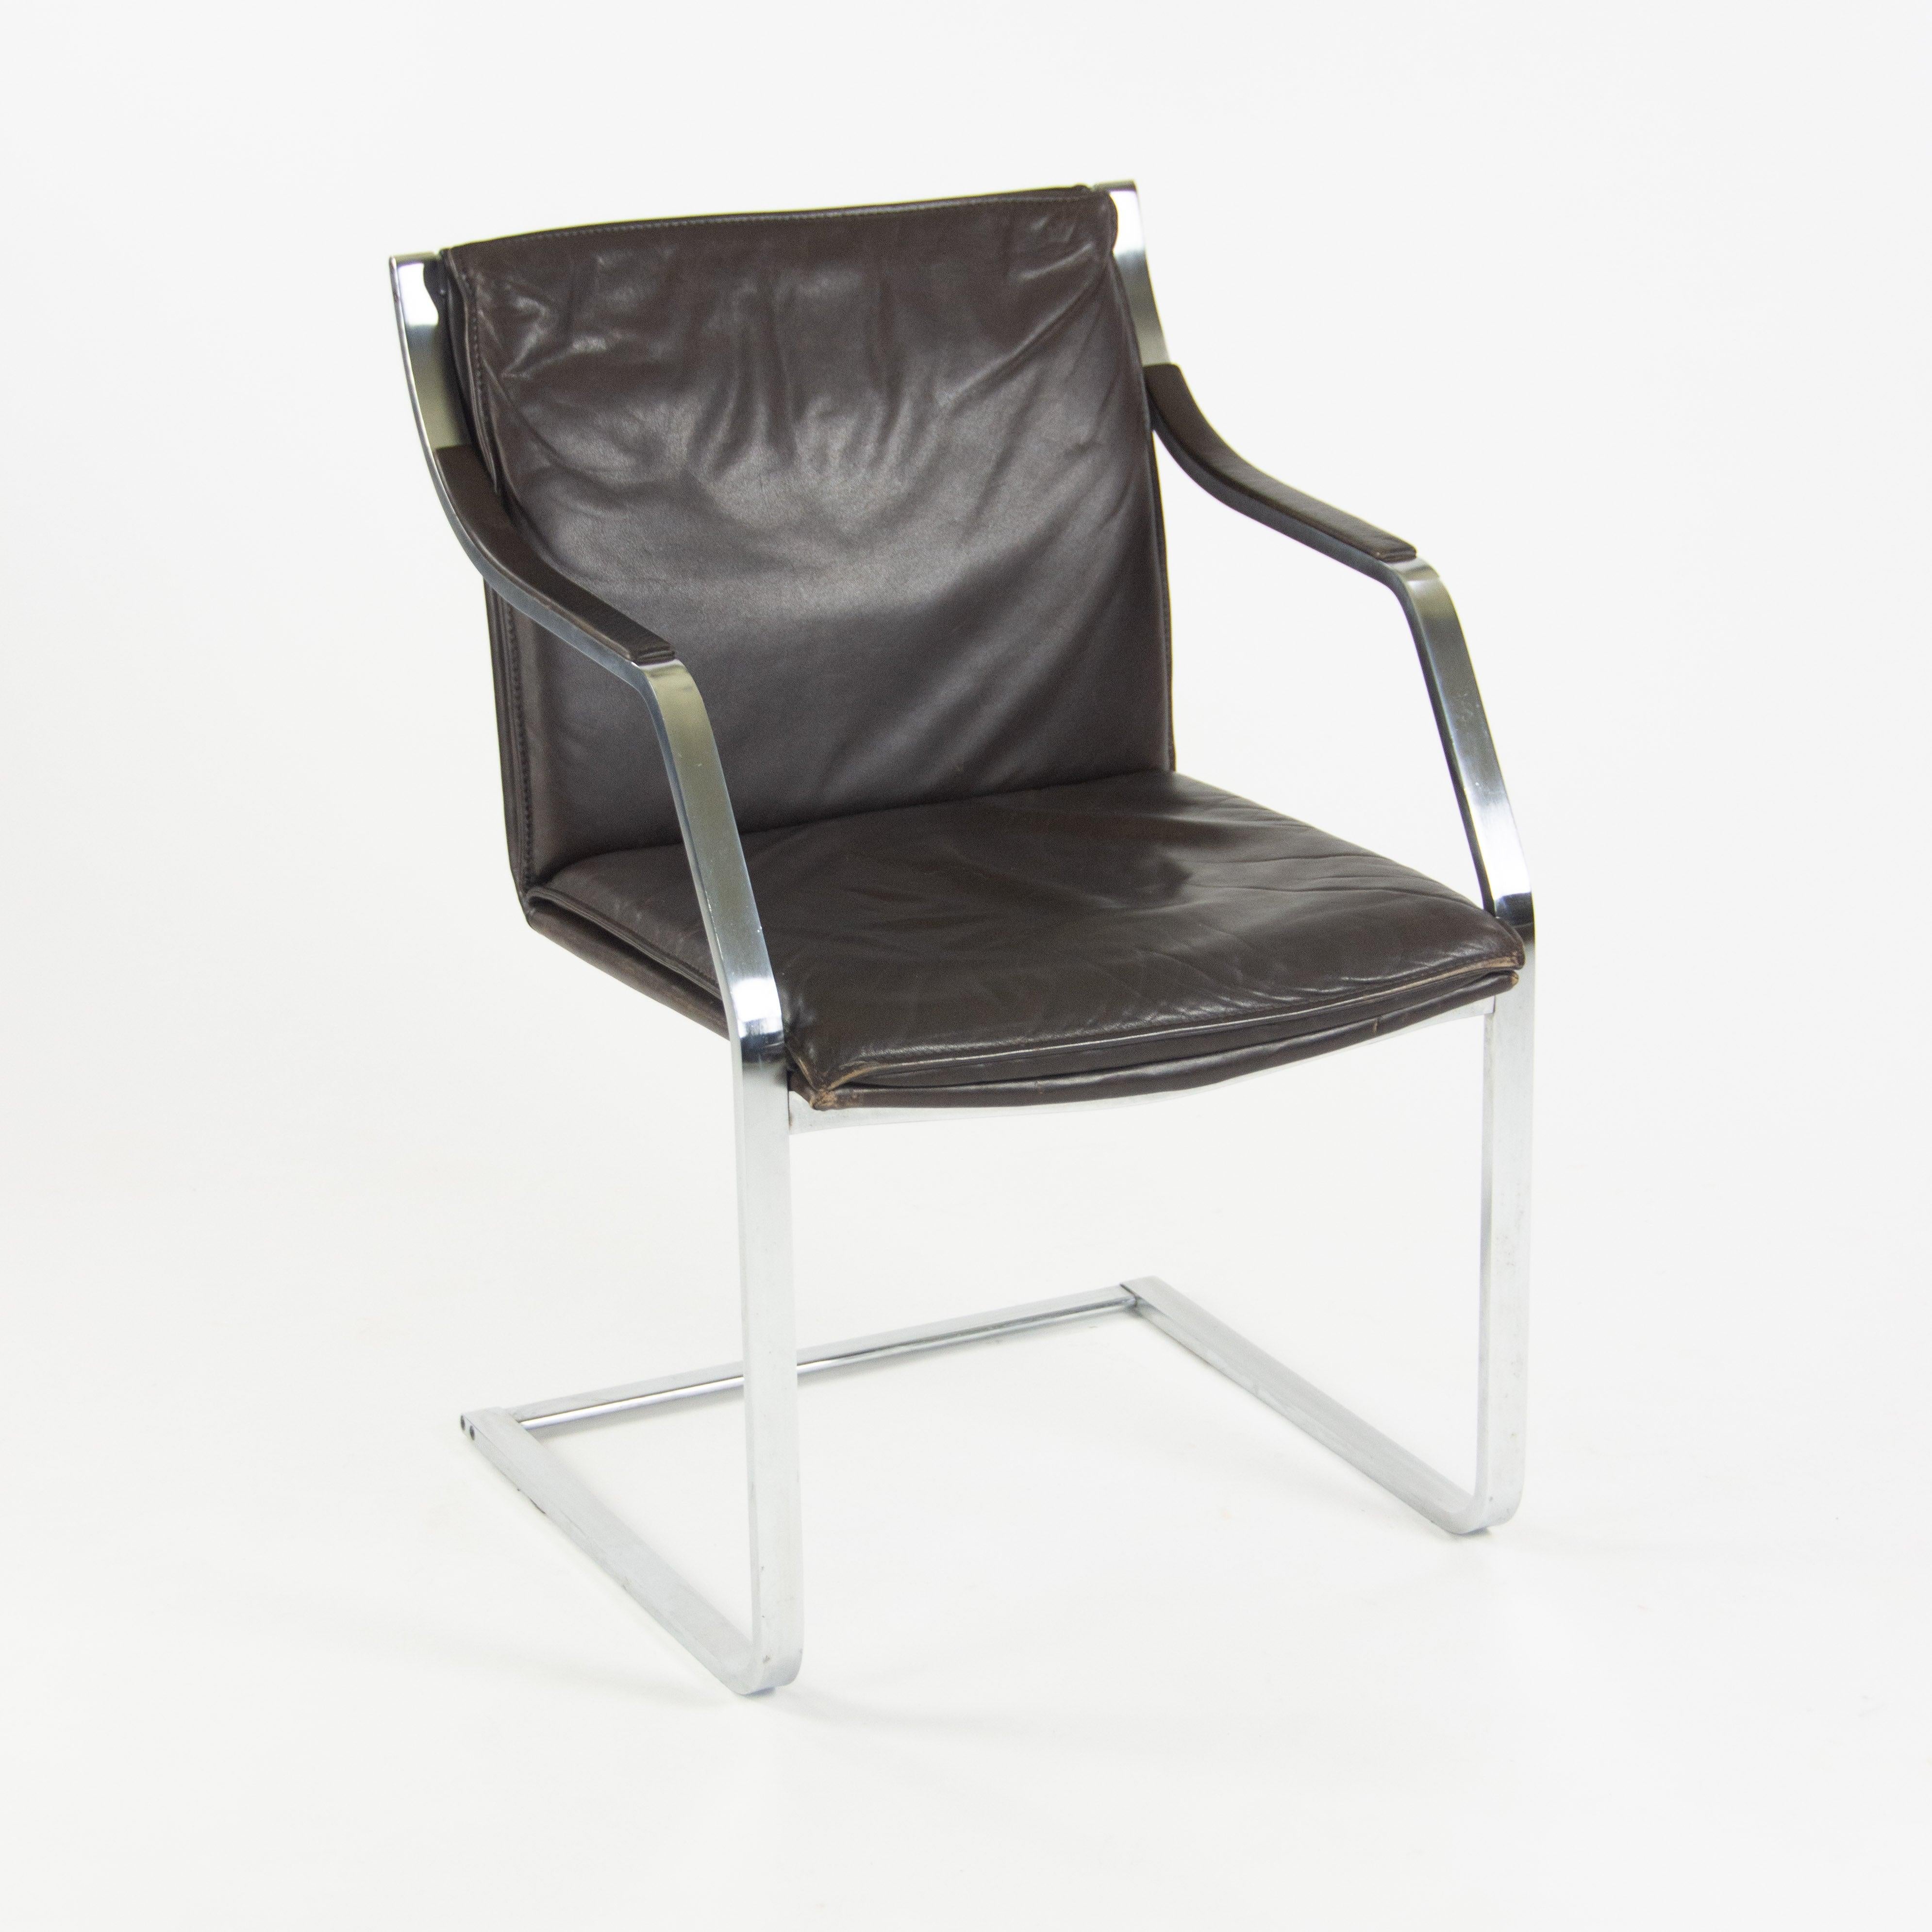 Listed for sale is an original vintage 1970's Rudolf B. Glatzel armchair, produced by Walter Knoll in Germany (The company owned by Hans Knoll of Knoll International's family). This particular example is in excellent vintage condition with beautiful